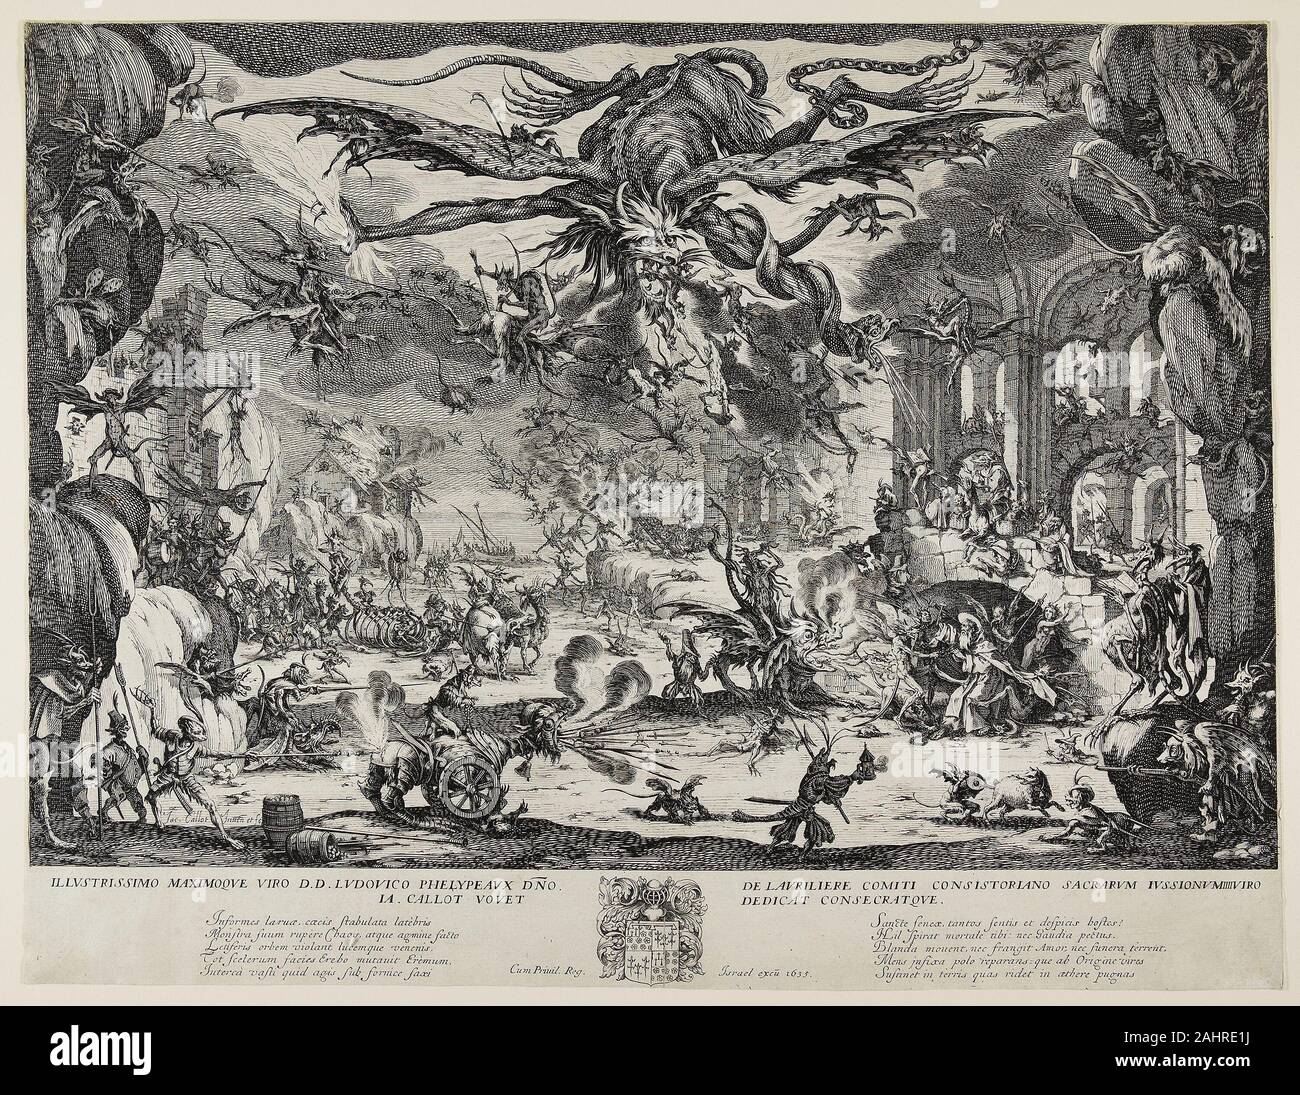 Jacques Callot. The Temptation of Saint Anthony. 1635. France. Etching in black on ivory laid paper Jacques Callot studied painting in his native Lorraine before going to Italy. He worked first in Rome, and was later appointed to the Florentine court, where he made prints of their festivals and theatrical productions. He returned to Nancy in 1621, renowned as a printmaker of innovative technique. His oeuvre consists of more than 1,400 prints. Callot returned to this ambitious, cataclysmic subject, which he had treated in 1617, just before his death. It may reflect his horror at the plague that Stock Photo